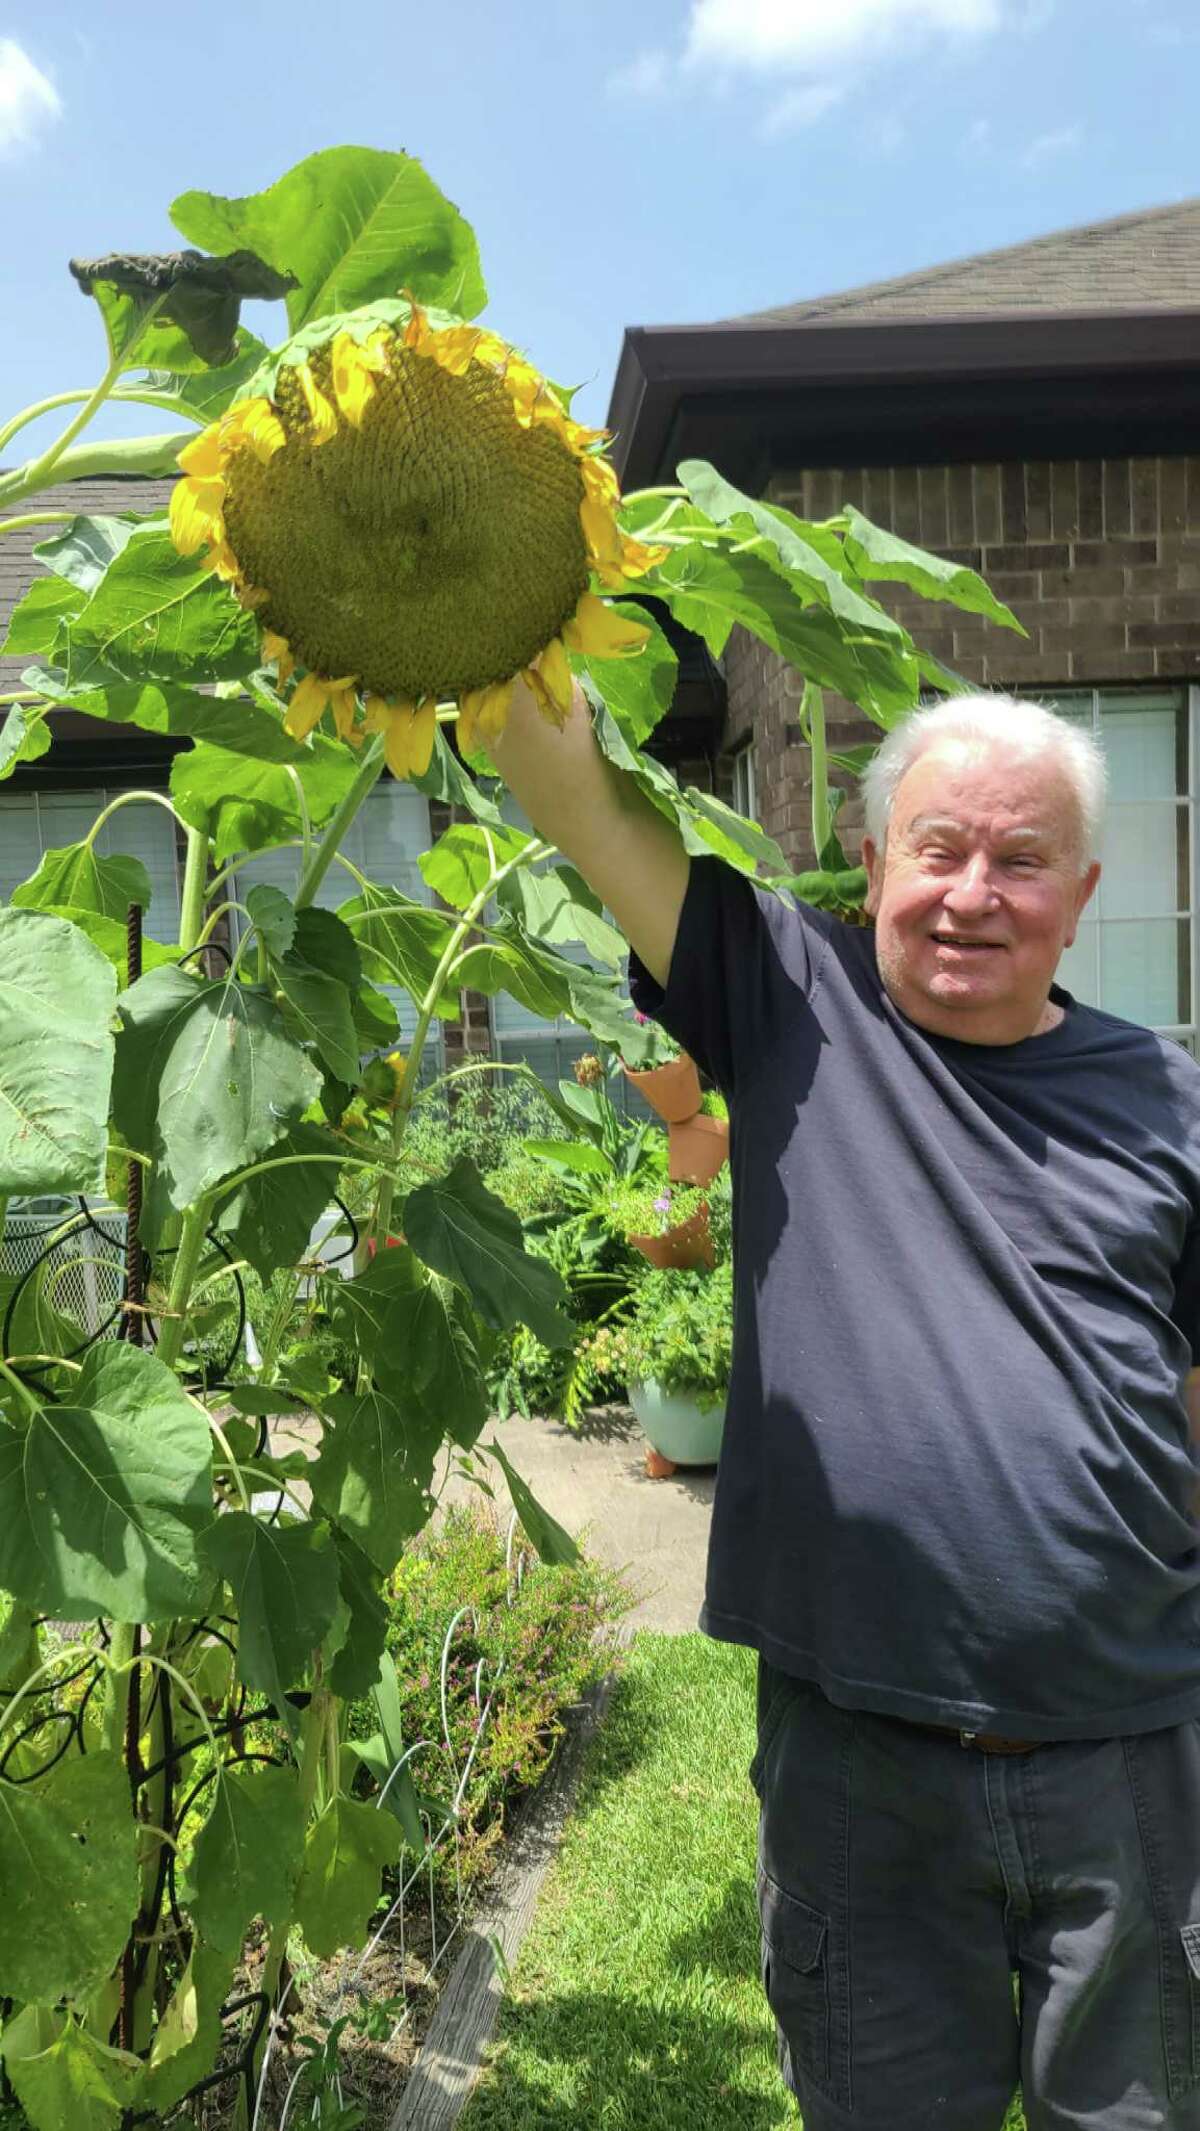 Sunflowers are easy, fast-growing, and a lot of fun. These “American Giant Hybrid” sunflowers grew so tall (they grow to 16’ tall) Jack Keller is dwarfed, even as the flower bent with the weight of the seedy head.